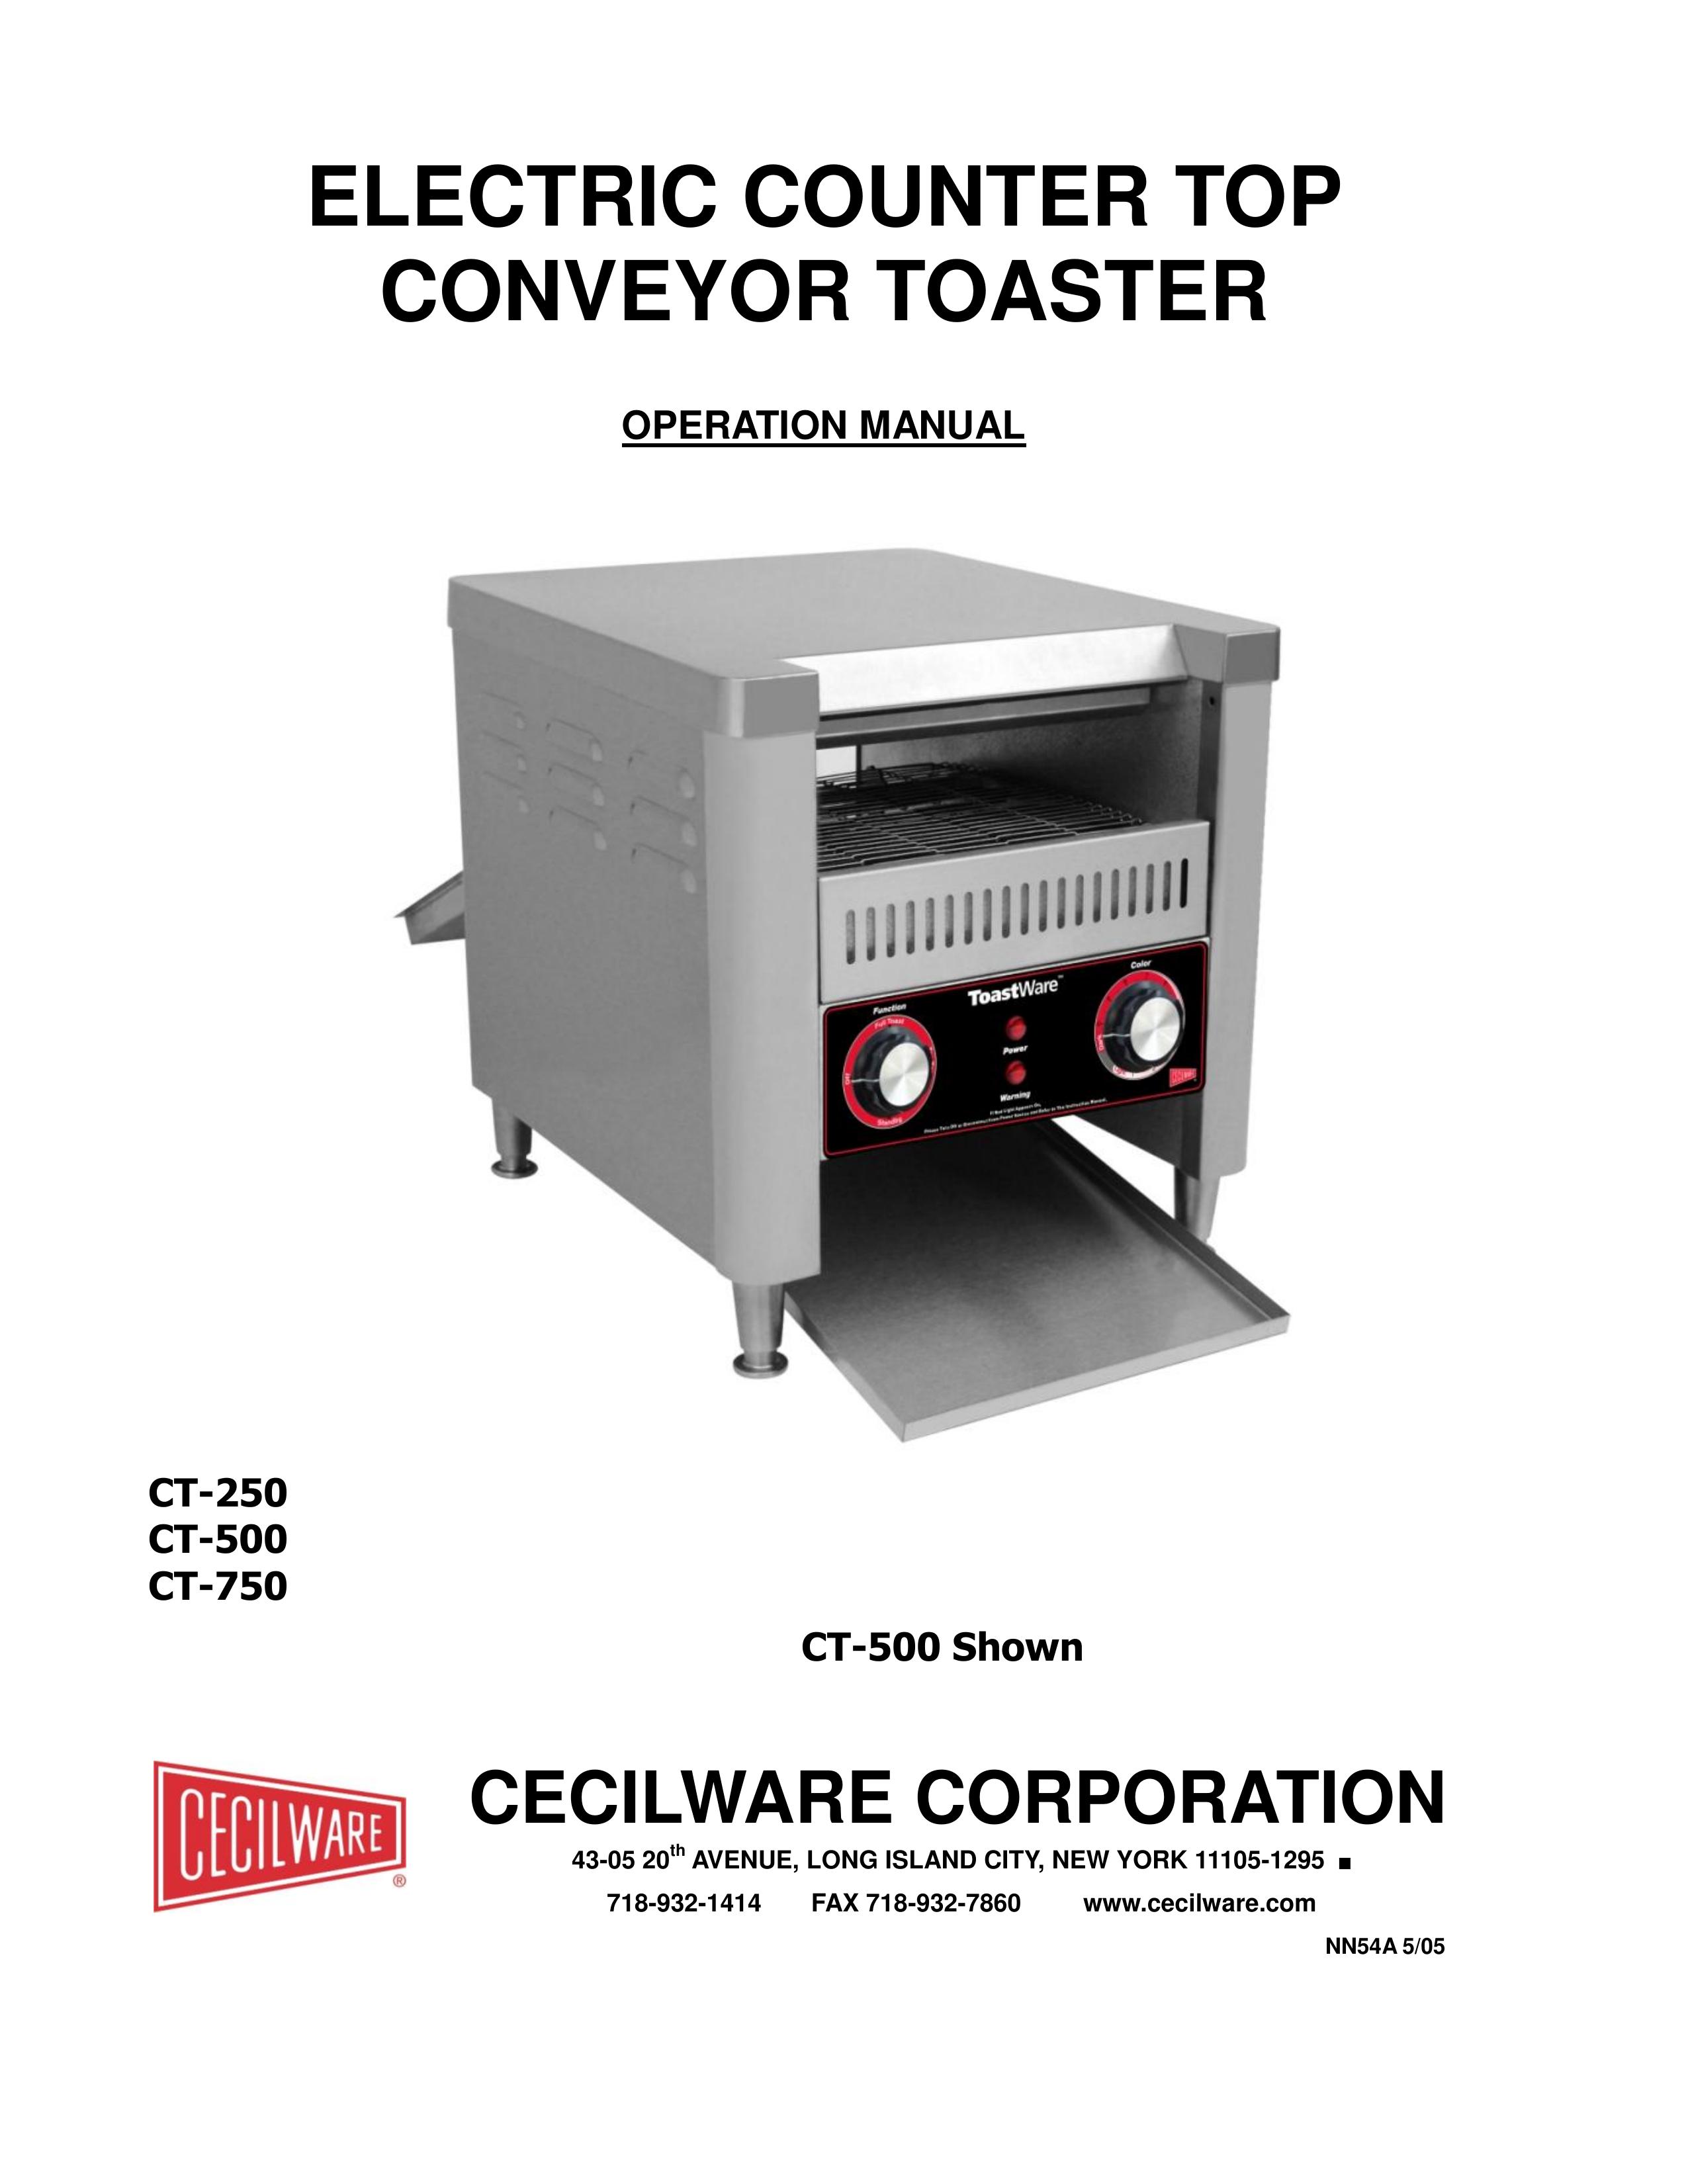 Cecilware CT-250 Toaster User Manual